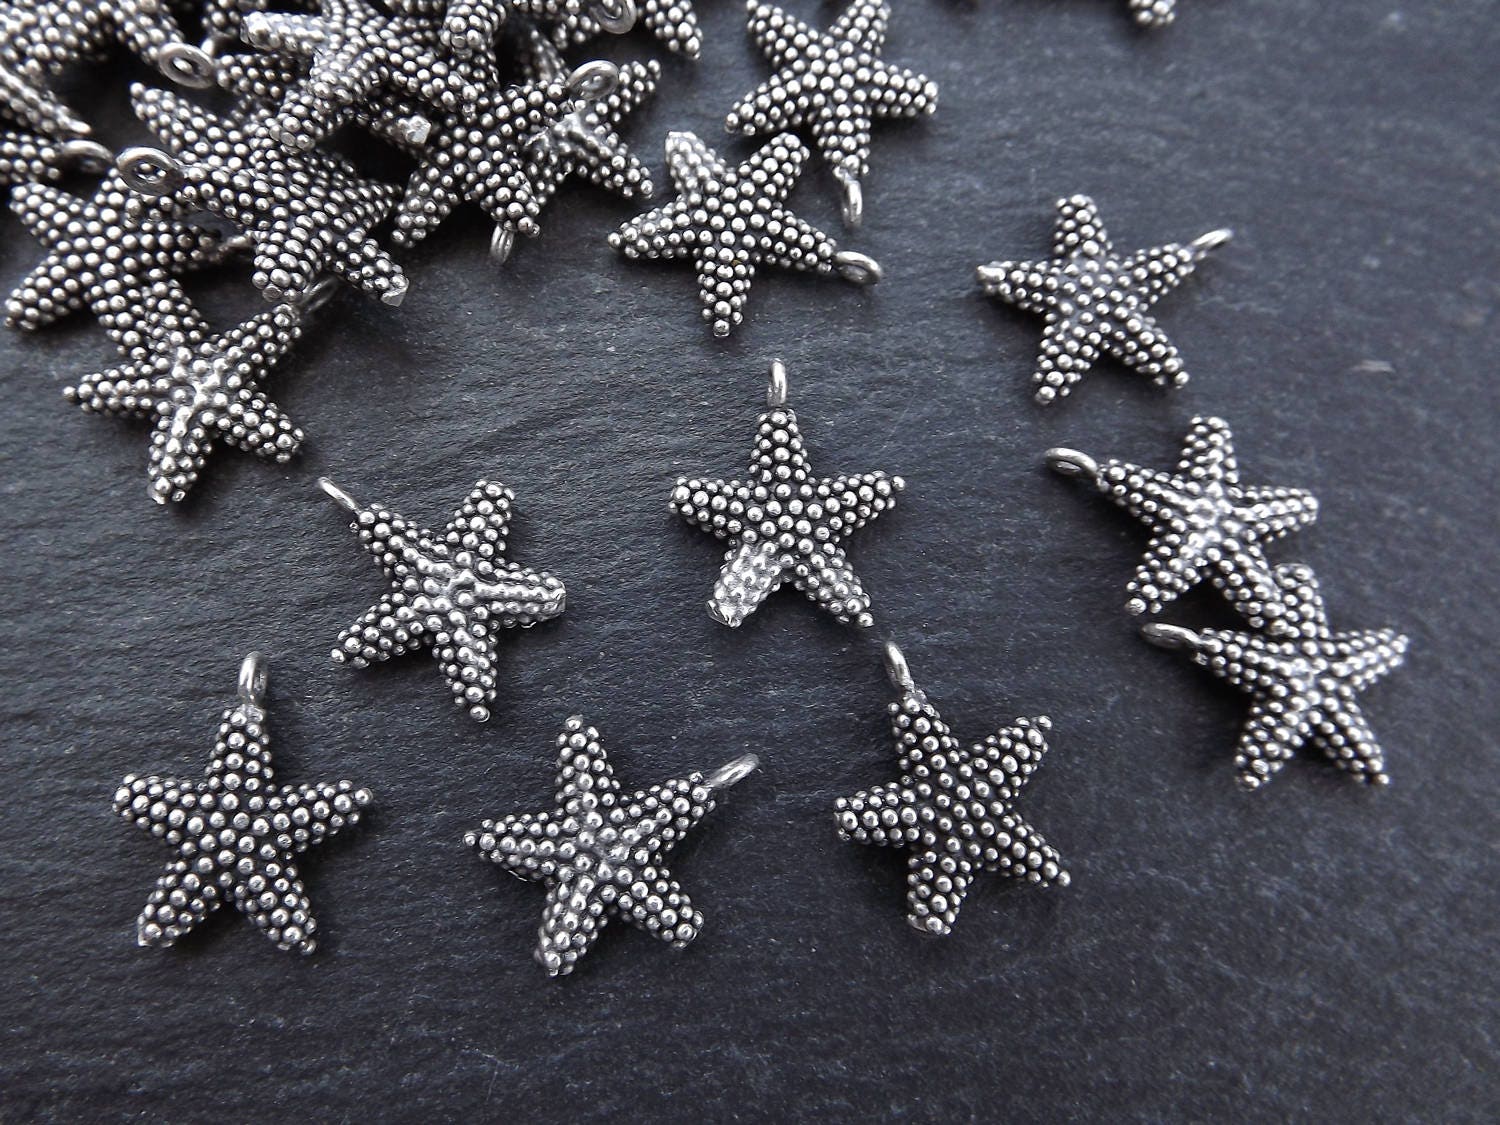 Silver Starfish Charms, Star Charms, Silver Stars, Beach Style, Bracelet Charms, Animal charms, Nautical, Matte Antique Silver Plated 8pc